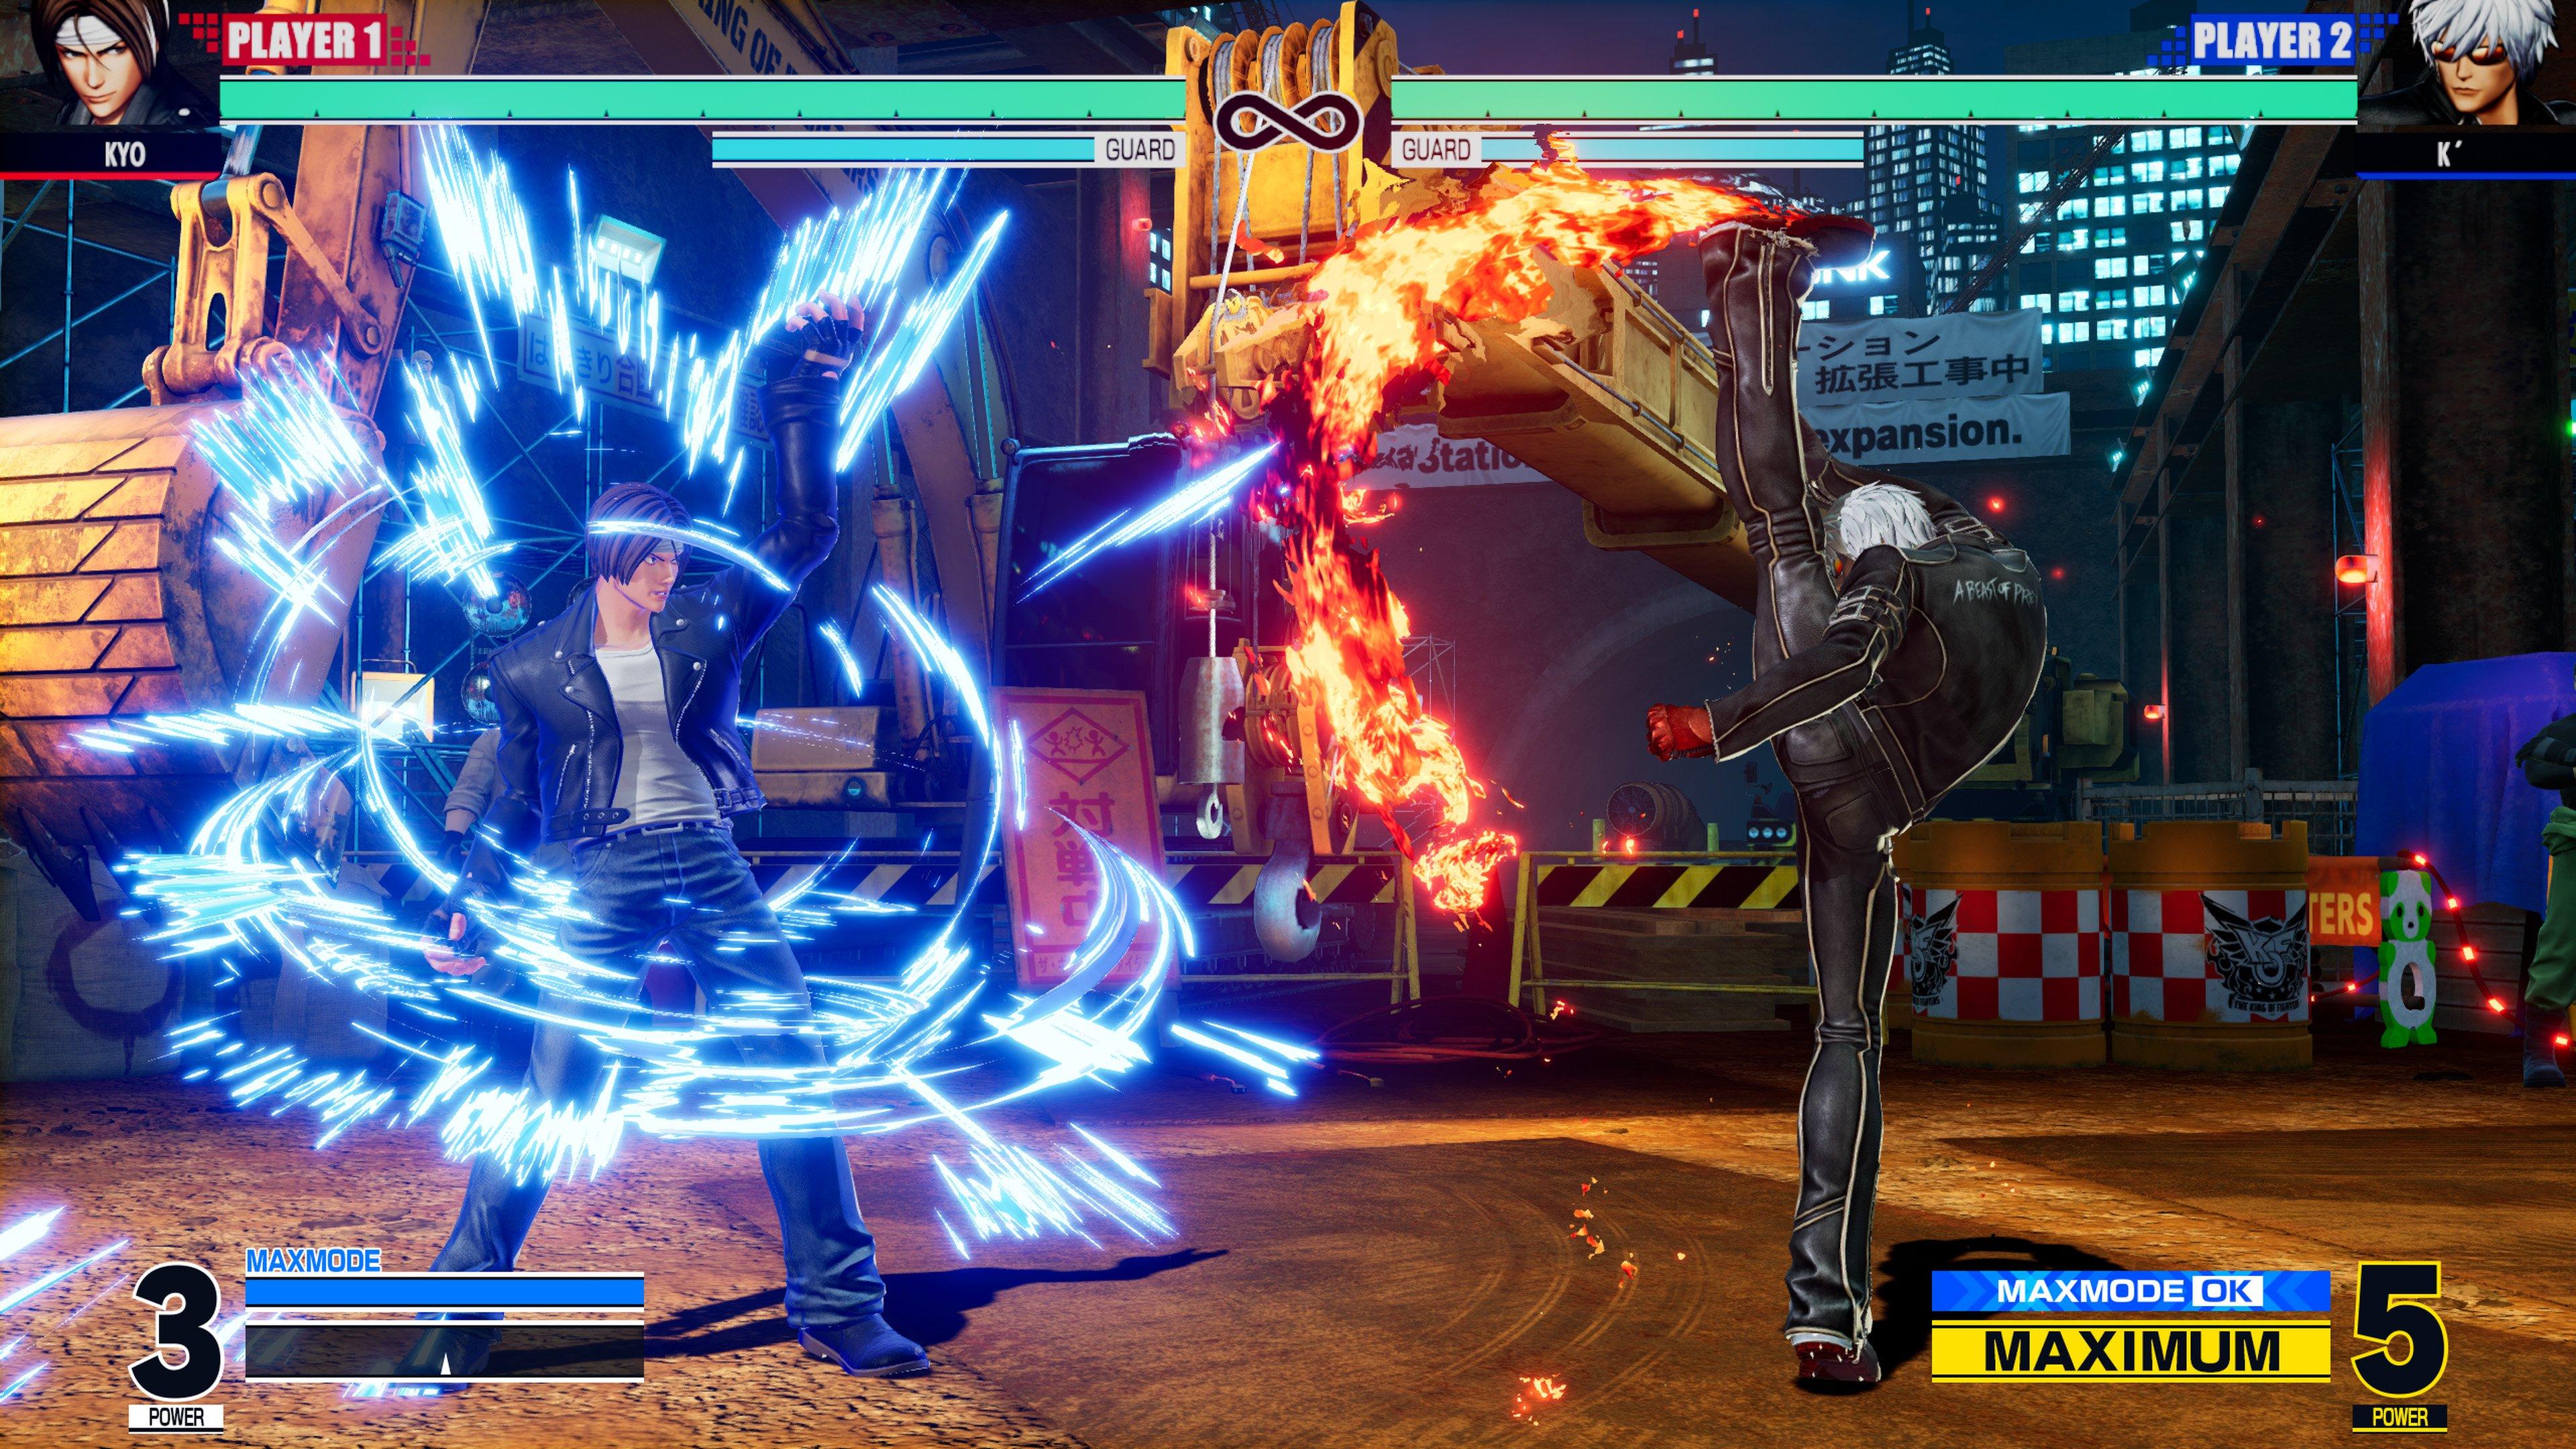 THE KING OF FIGHTERS XV Is Now Available For Digital Pre-order And Pre- download On Xbox Series X